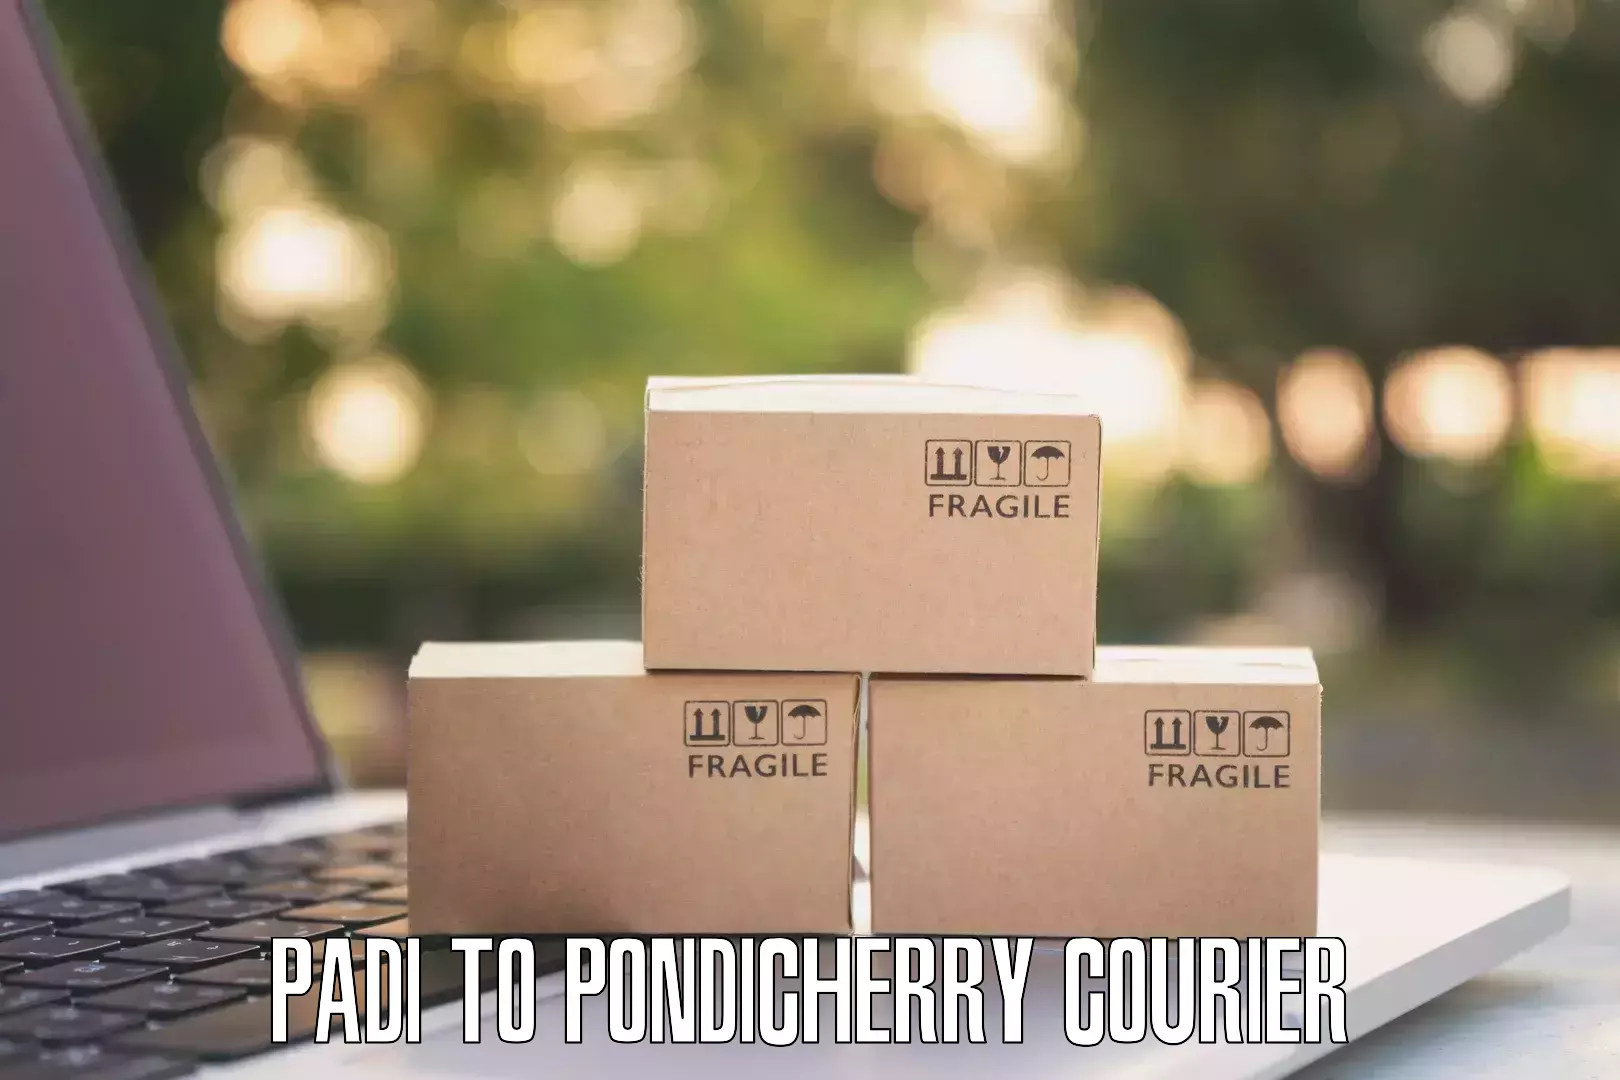 Business courier solutions Padi to Pondicherry